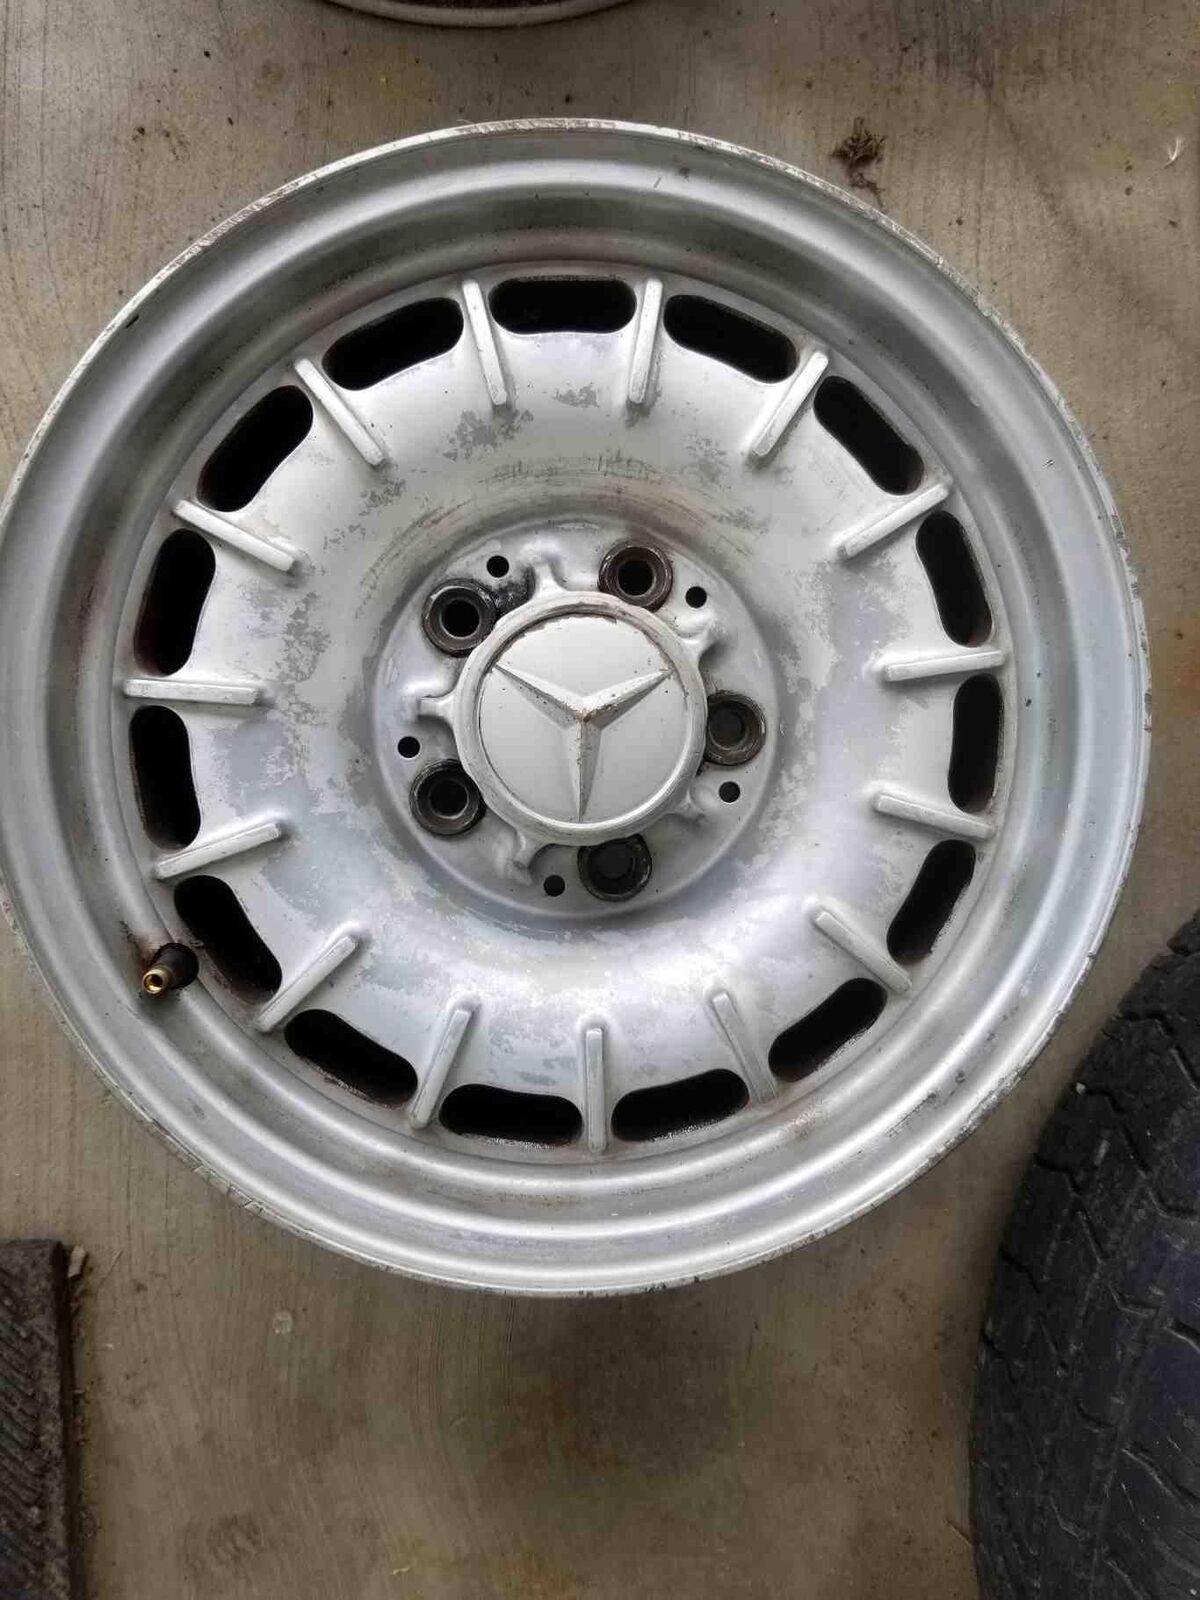 72 - 85 MERCEDES W123 300D Wheel 14x6 Alloy Used Oem #5 Light Curb Some Marks